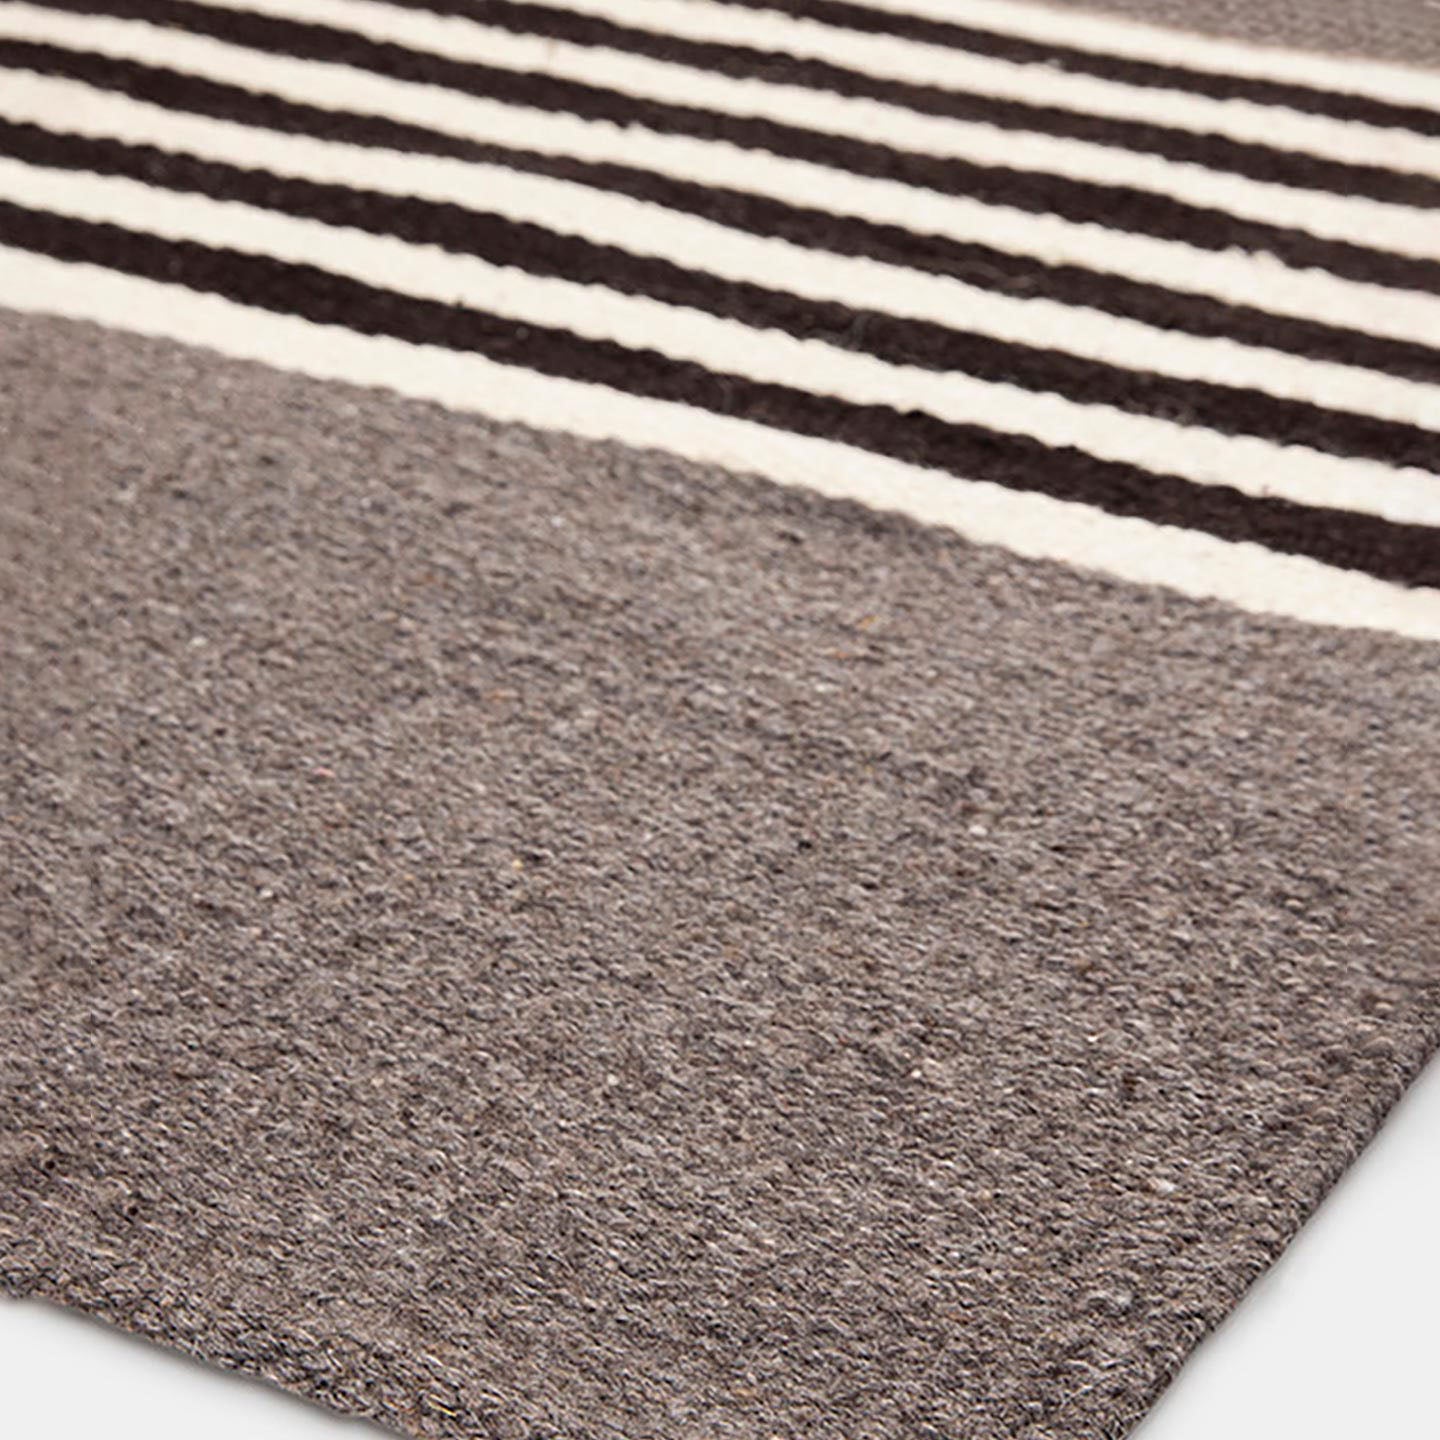 Handwoven Quehue Rug, Undyed Wool